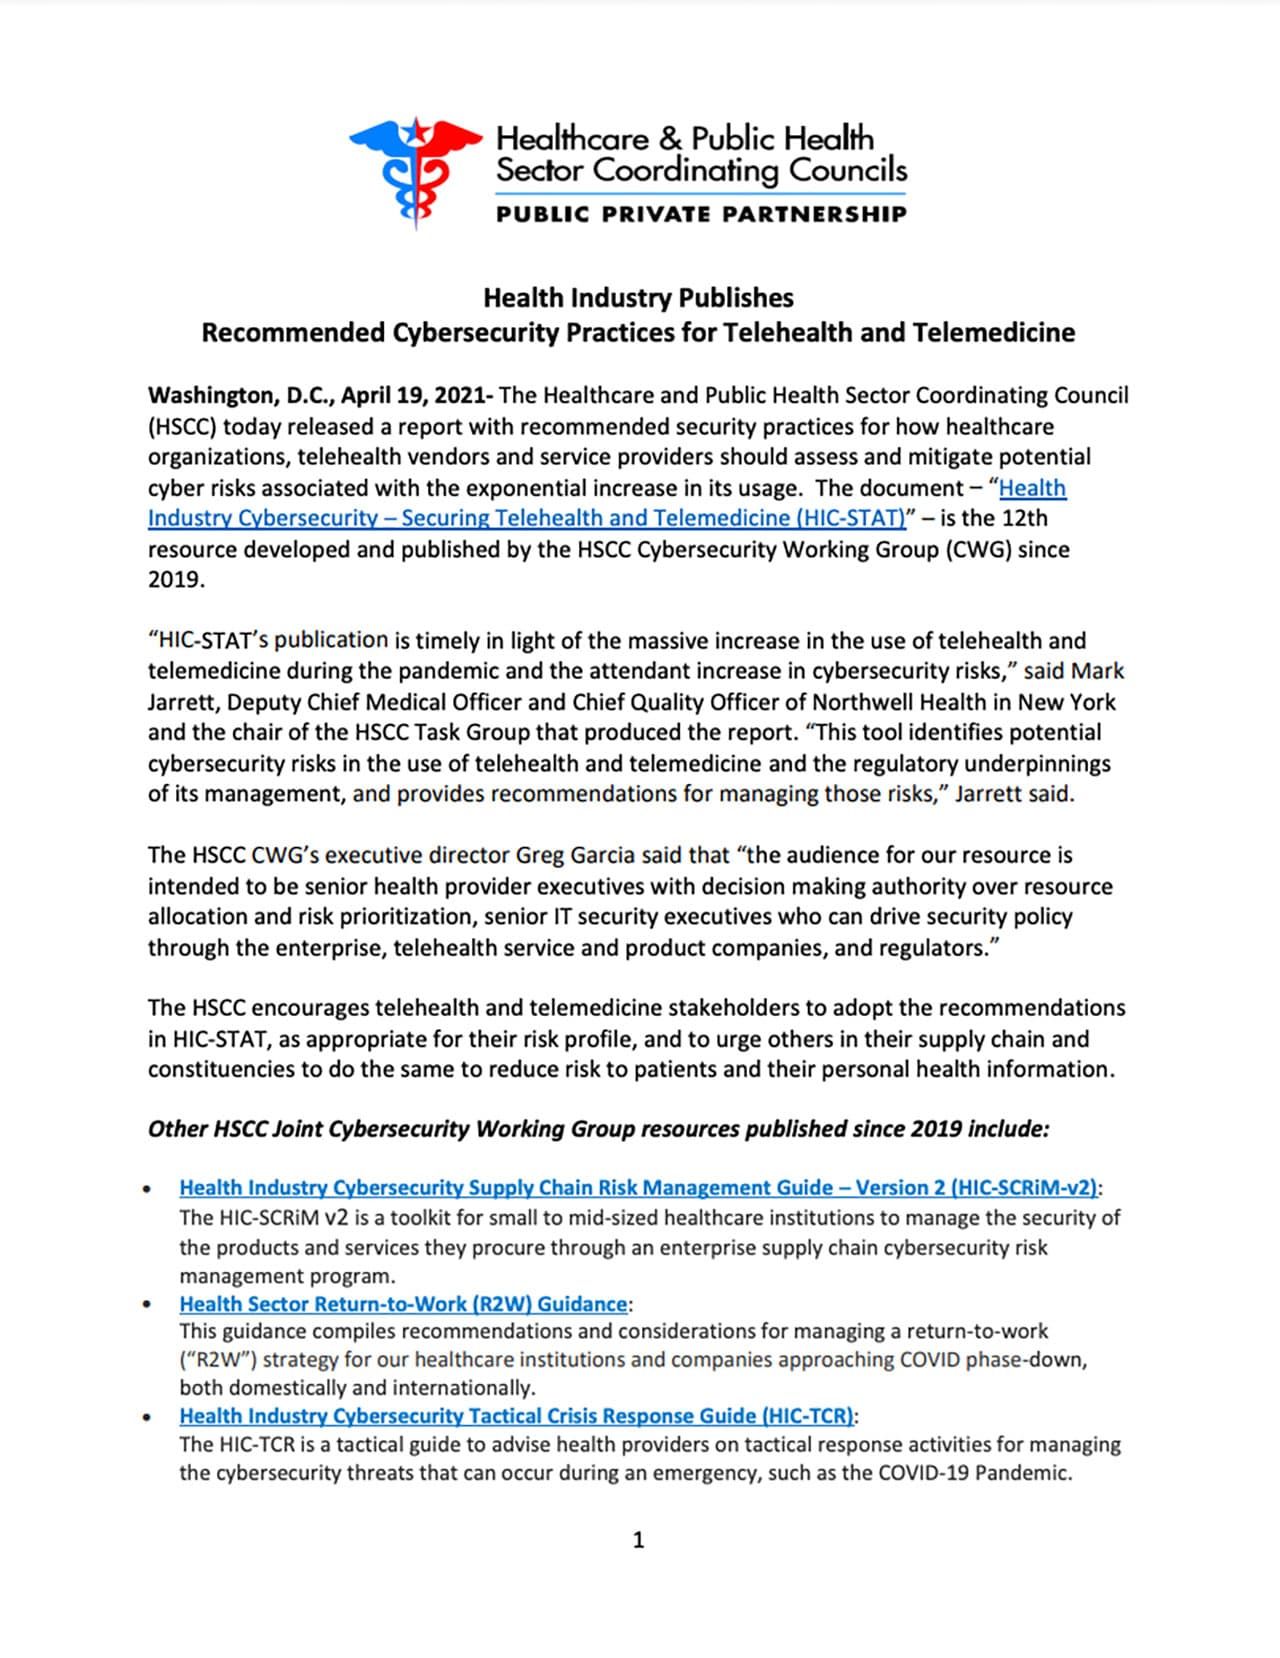 4/19/2021:  Health Sector Publishes Telehealth Cybersecurity Recommendations